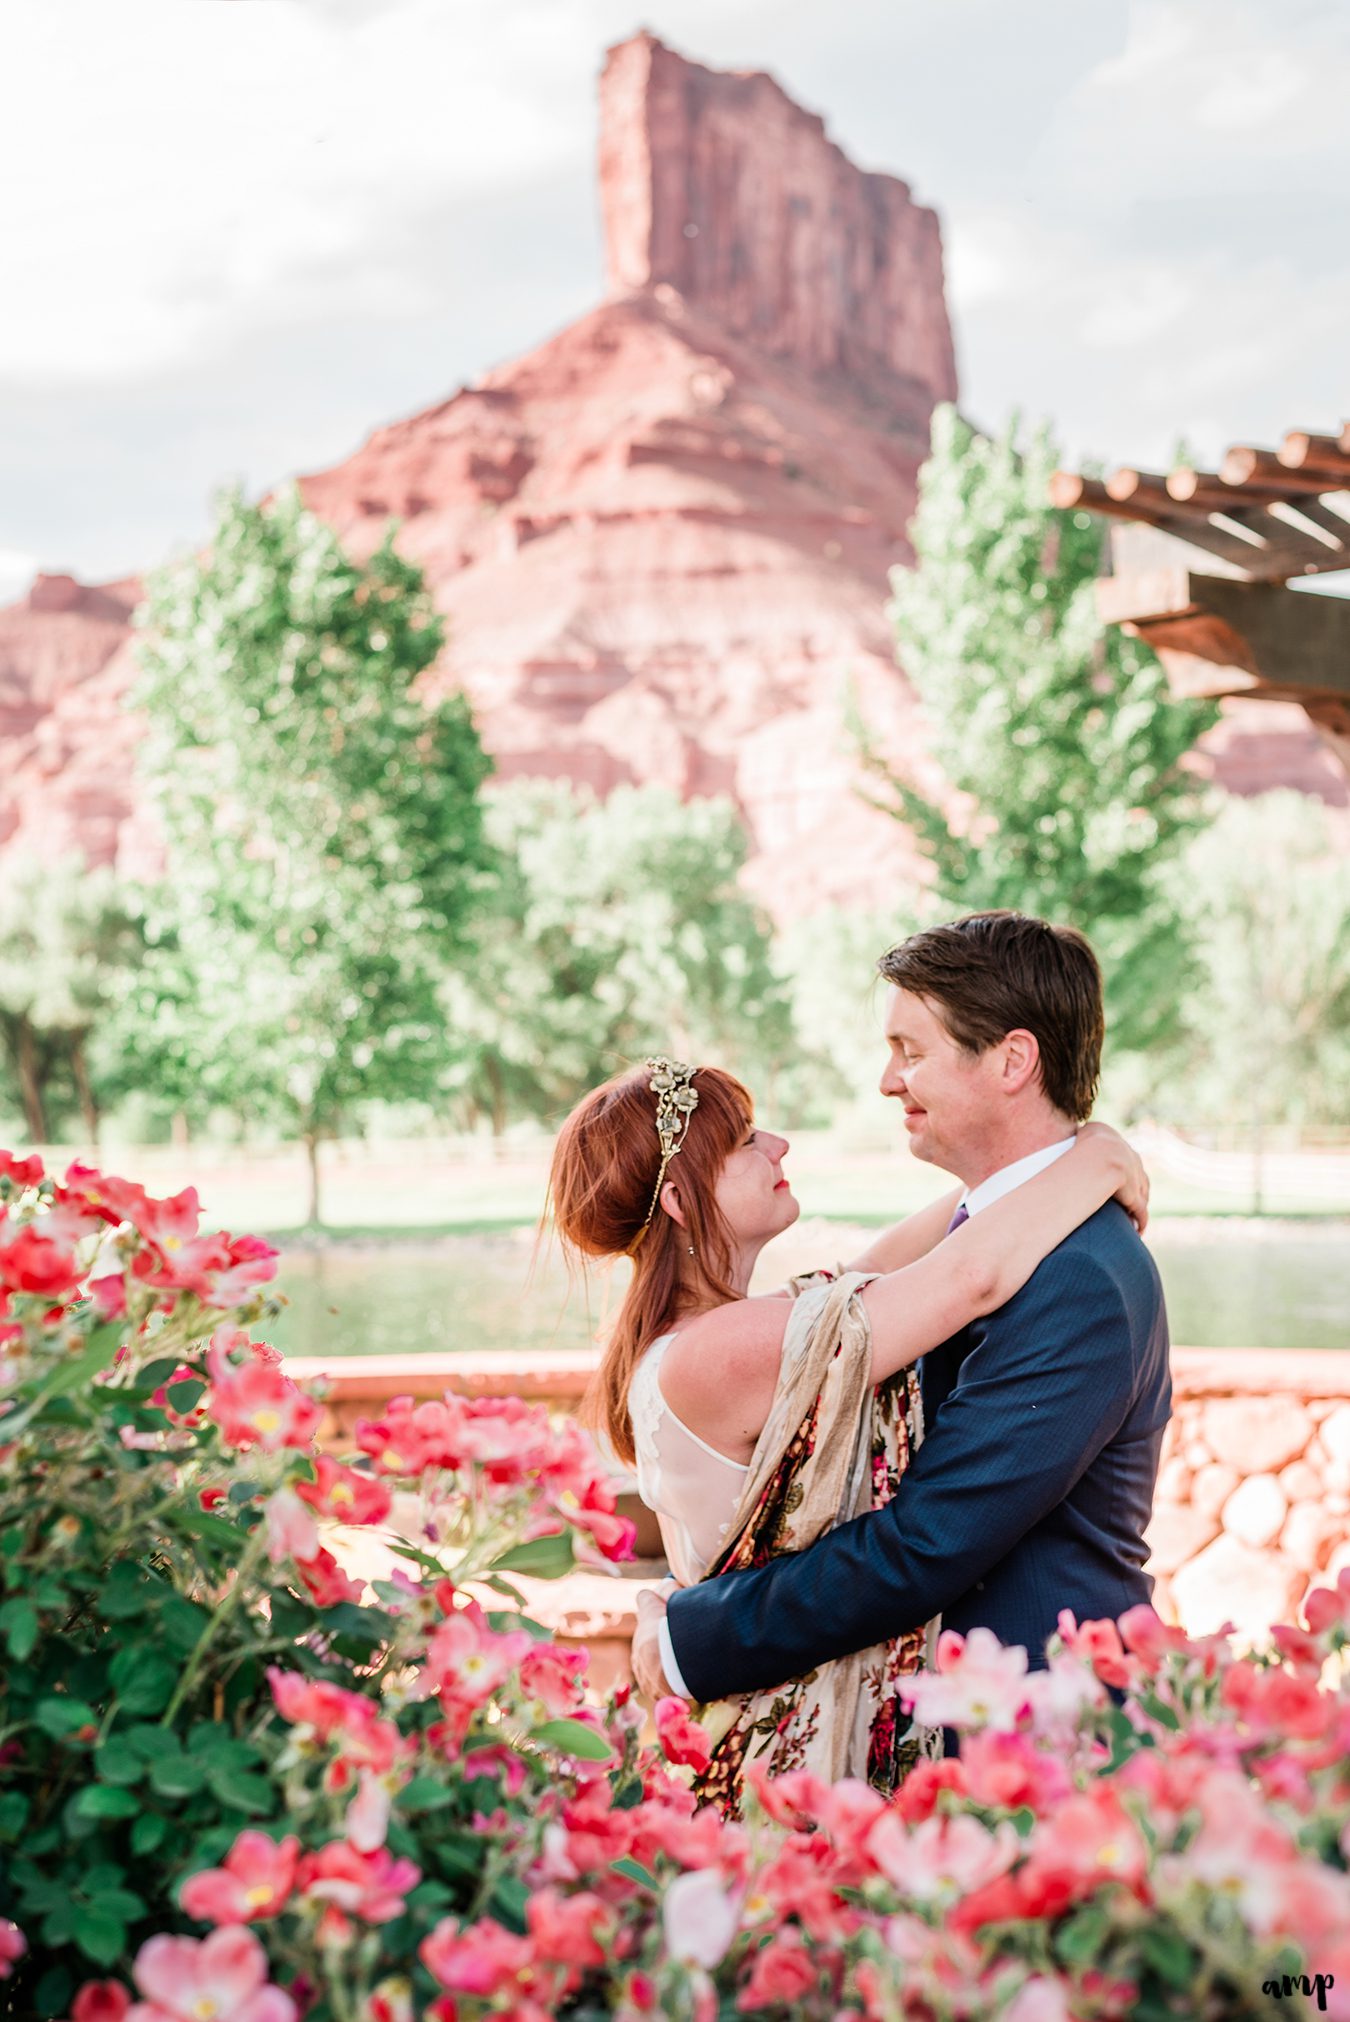 Blake and Carrie snuggling under the pergolas at Gateway Canyons Resort